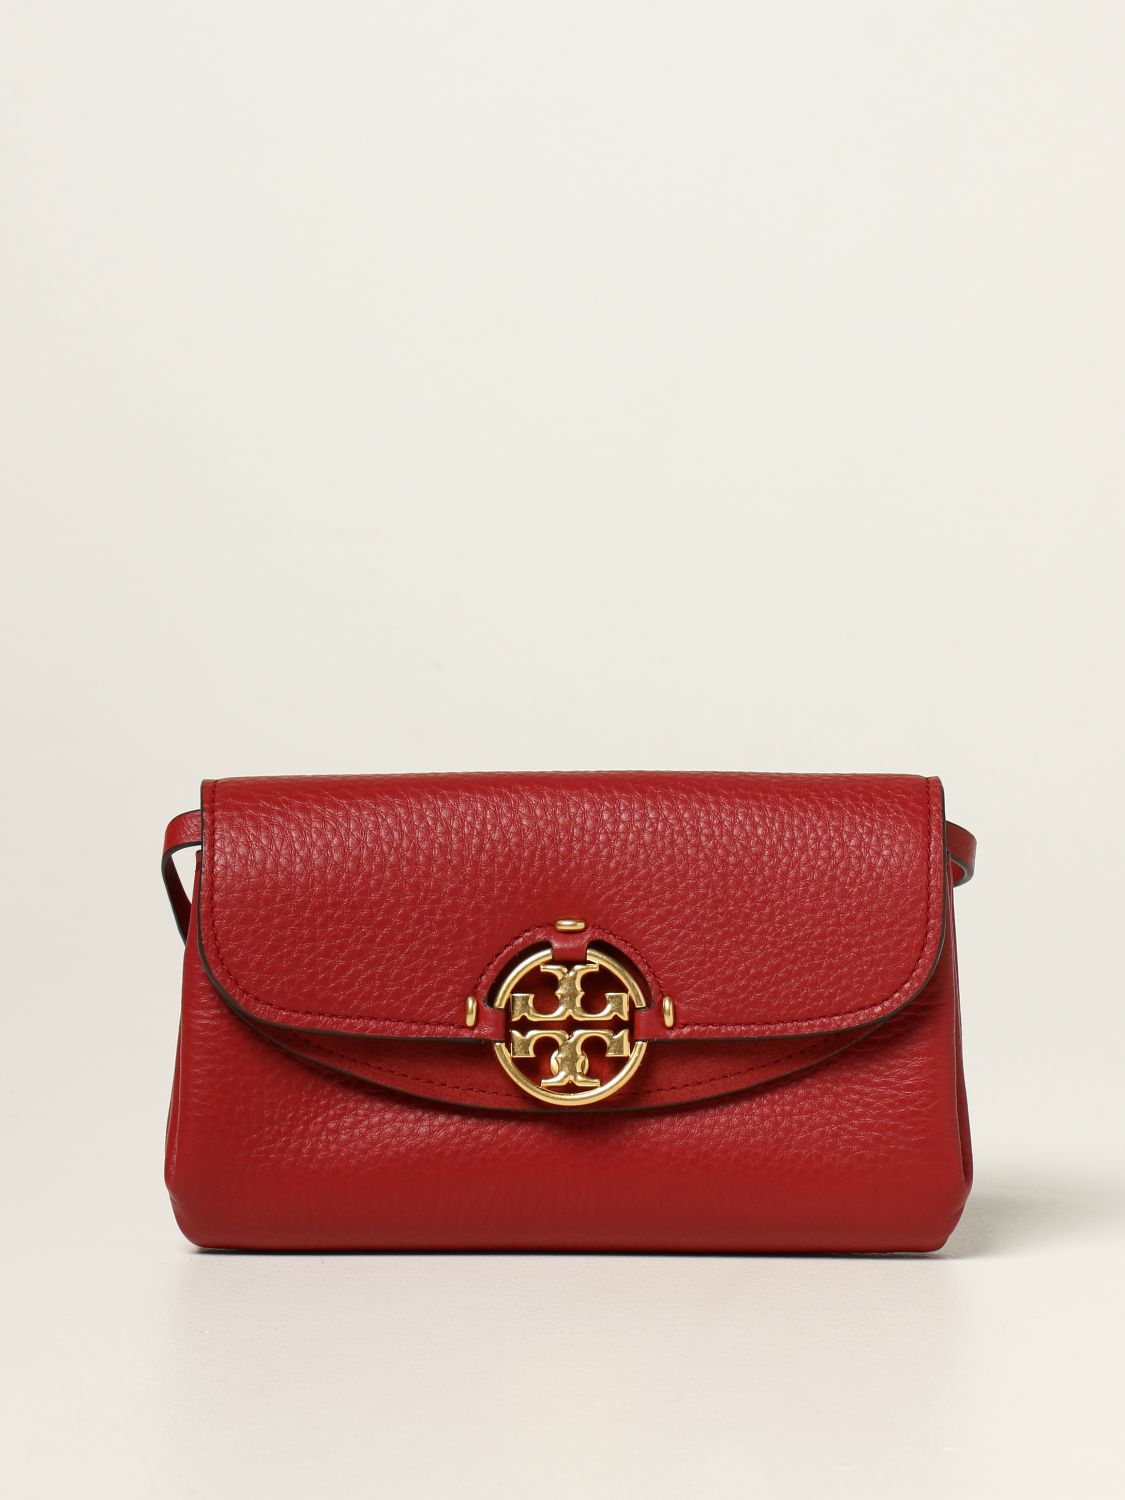 TORY BURCH: Miller bag in grained leather with emblem - Red | Tory Burch  mini bag 80808 online on 